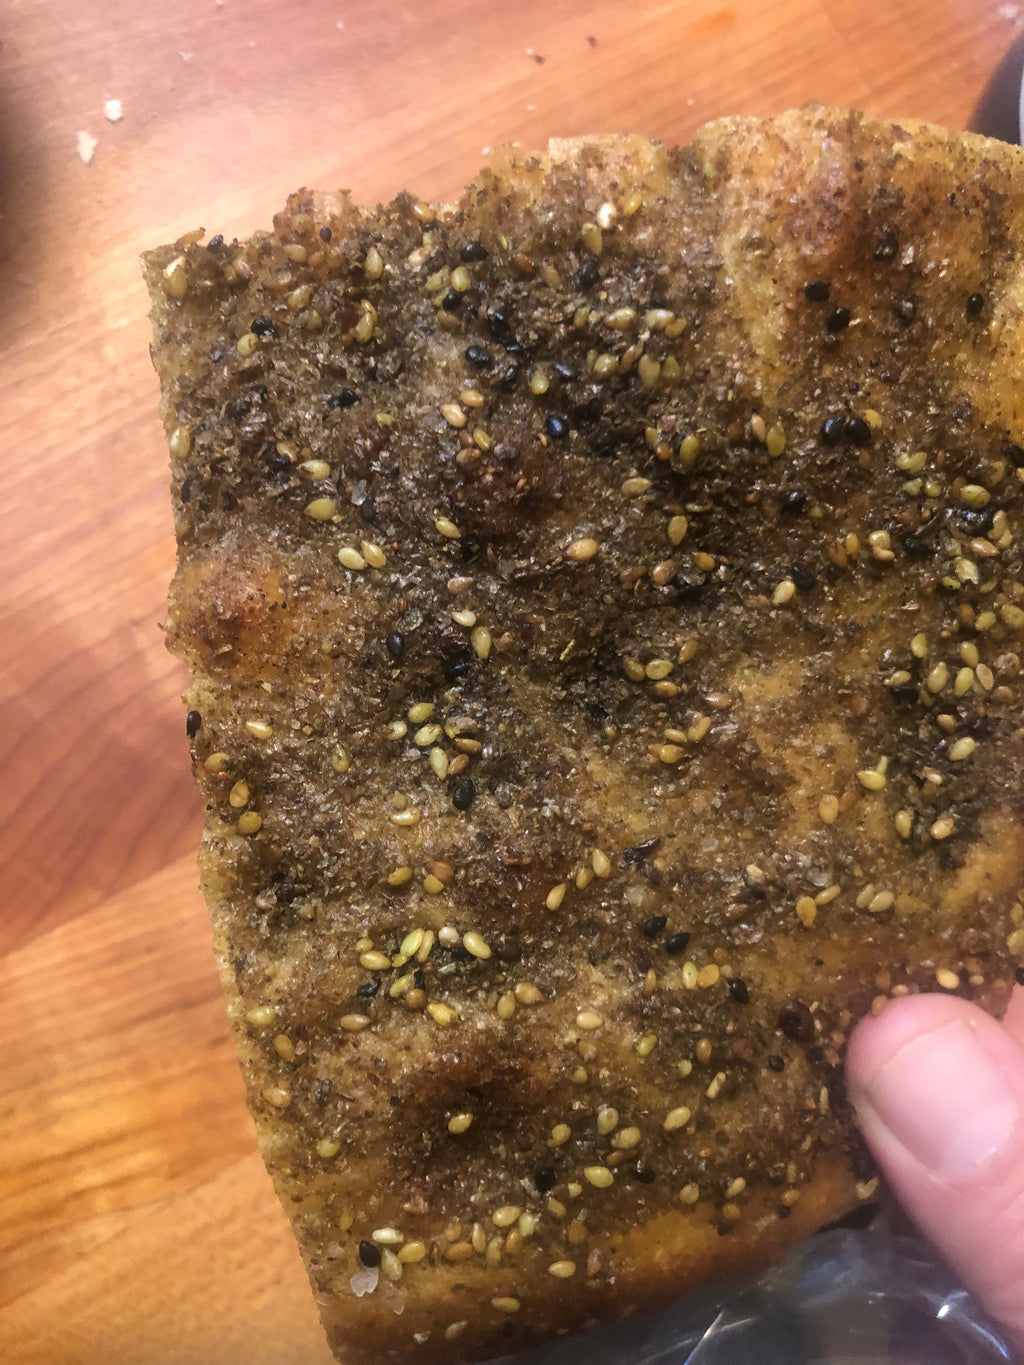 WED MAY 1st 4-pack Za'atar flatbread Porch Pick up 4pm-9pm OR Purplebrown Farm Store 4:30-6:30pm